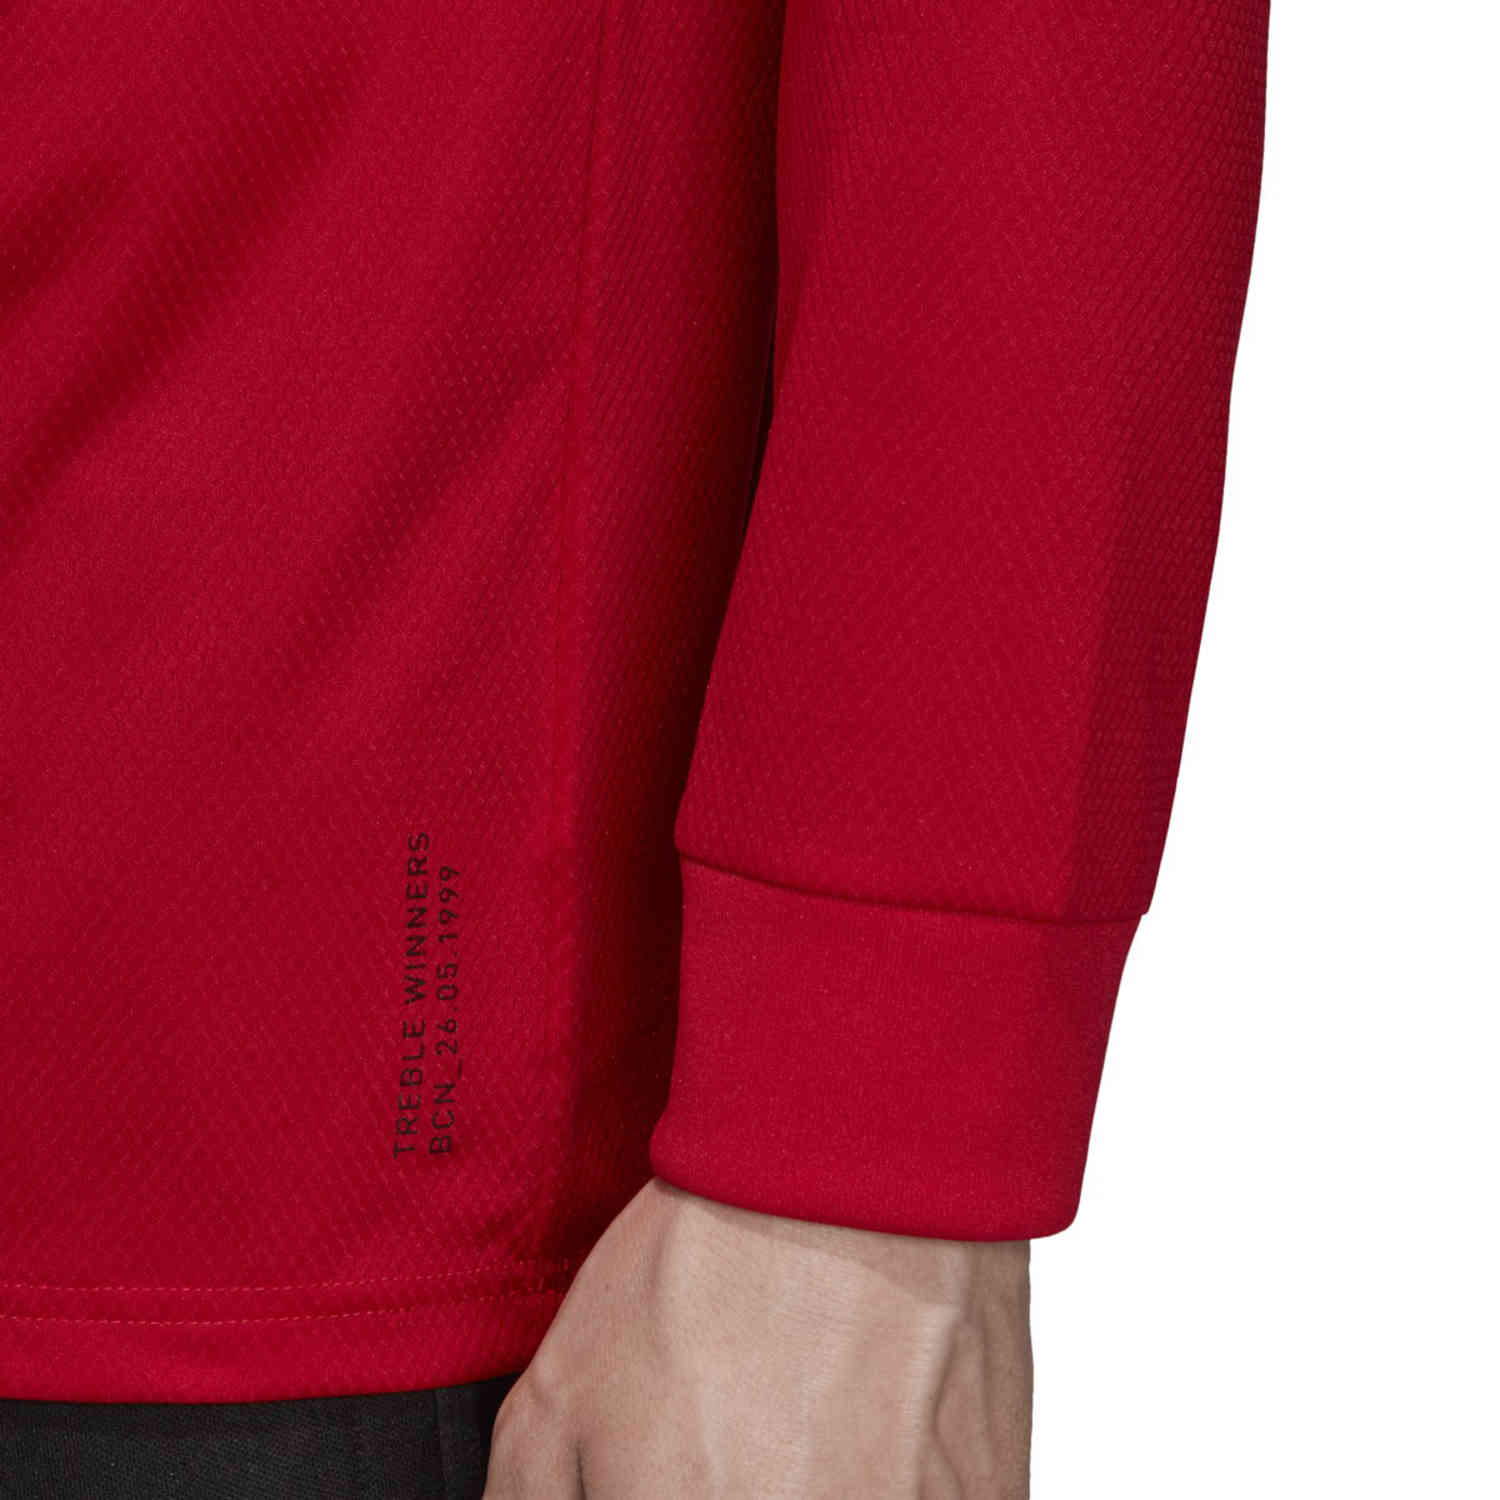 adidas Manchester United L/S Home Jersey - 2019/20 - SoccerPro